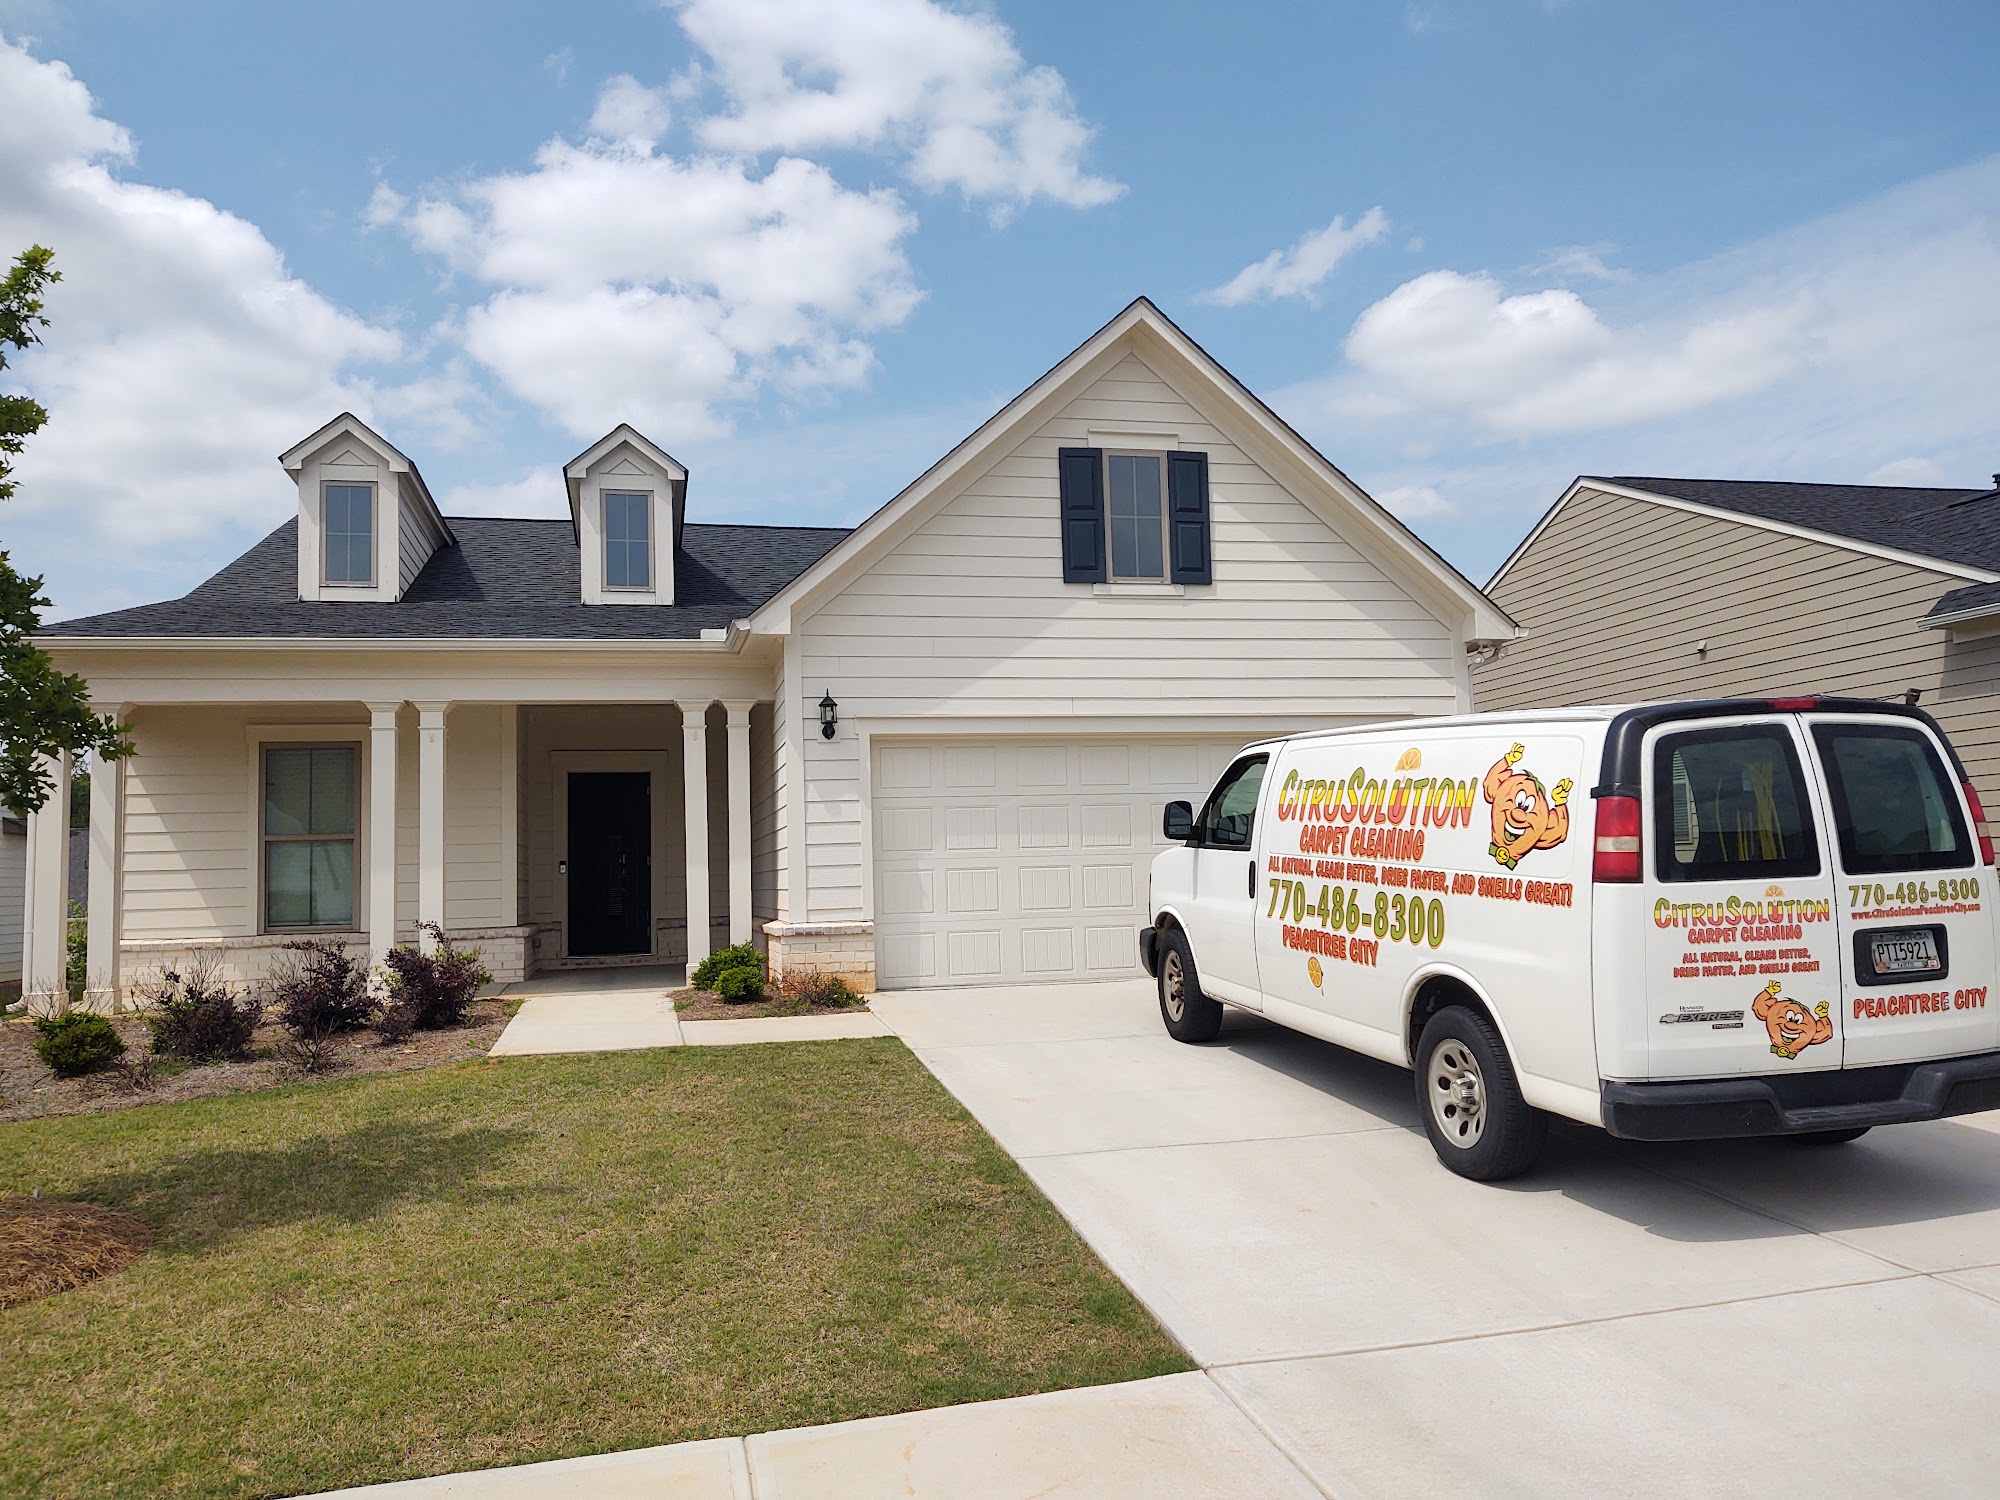 CitruSolution Carpet Cleaning Peachtree City